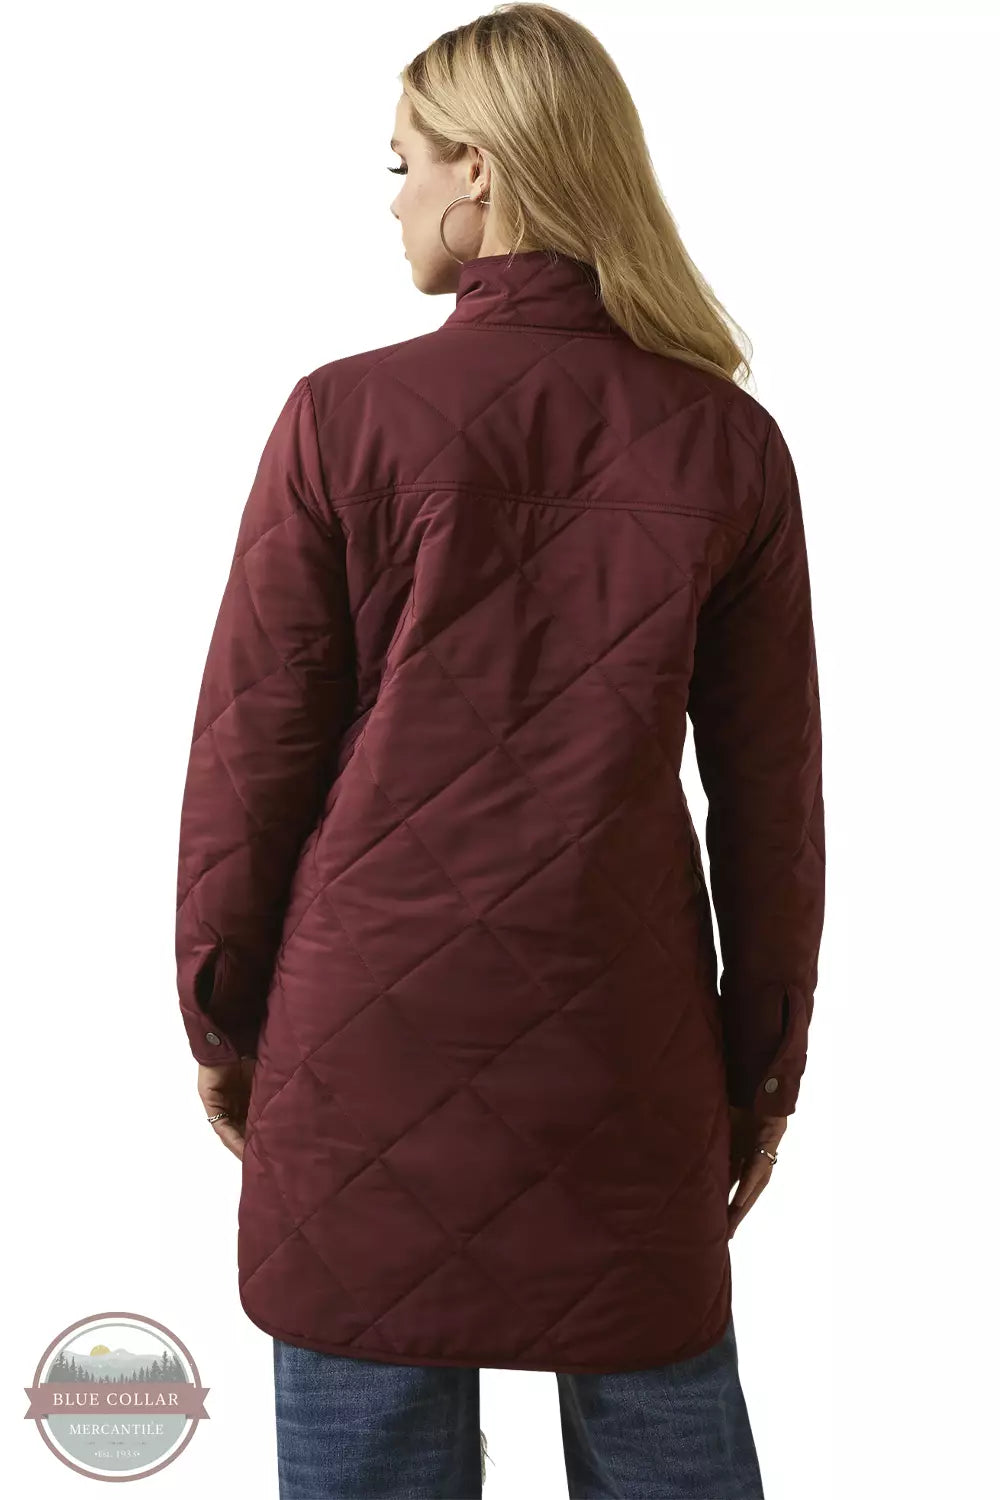 Ariat 10046427 Quilted Jacket in Tawny Port Back View